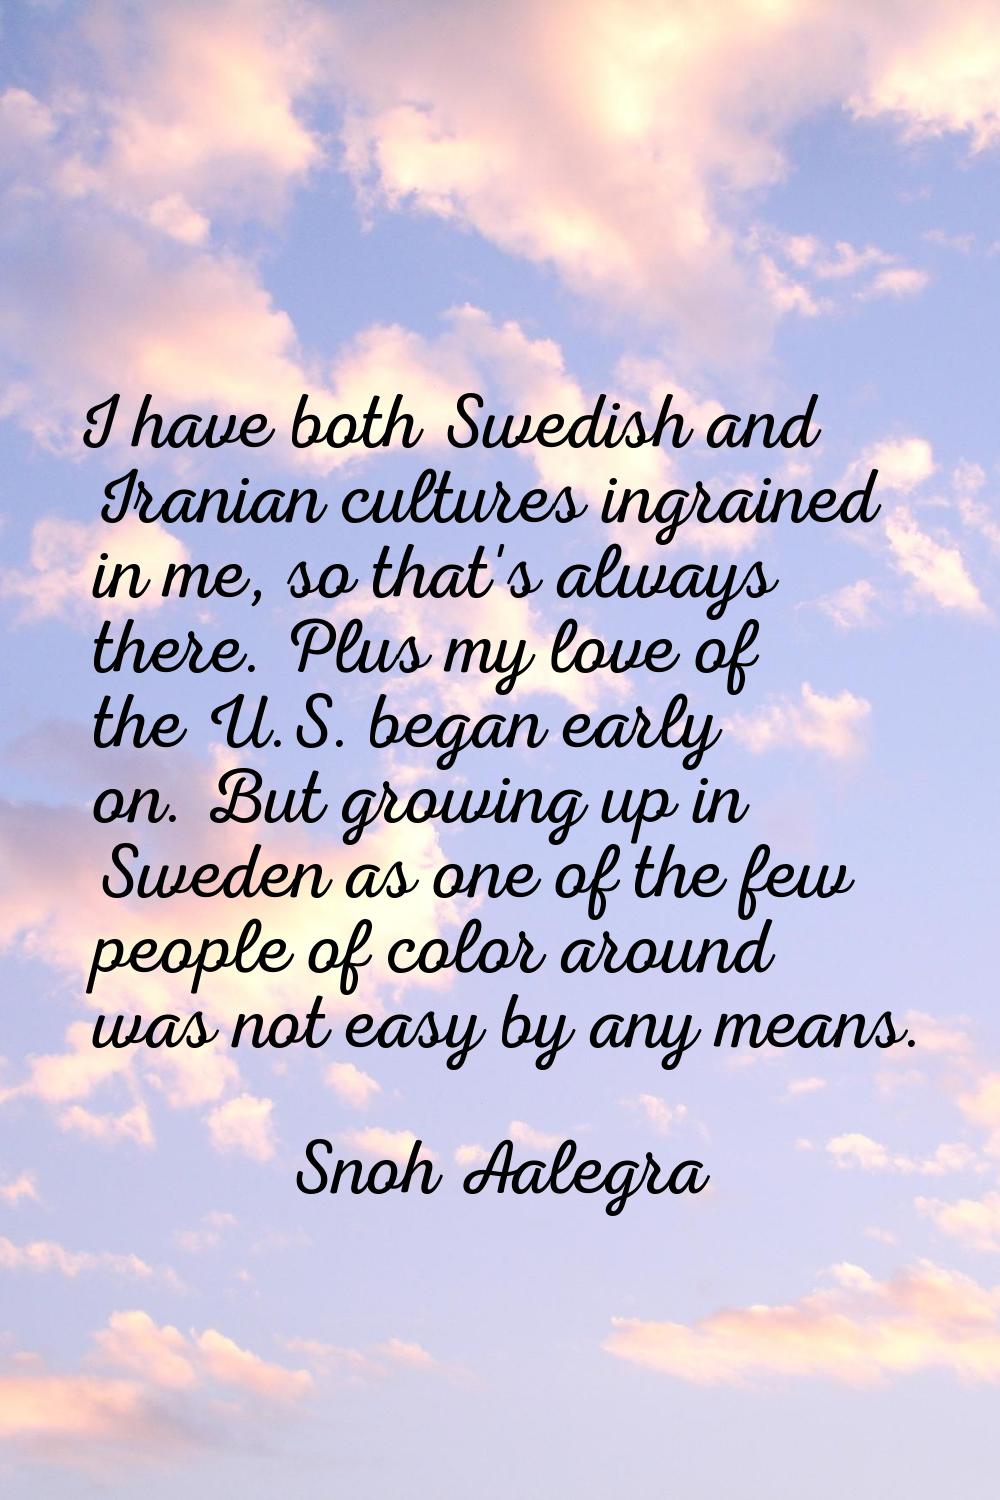 I have both Swedish and Iranian cultures ingrained in me, so that's always there. Plus my love of t